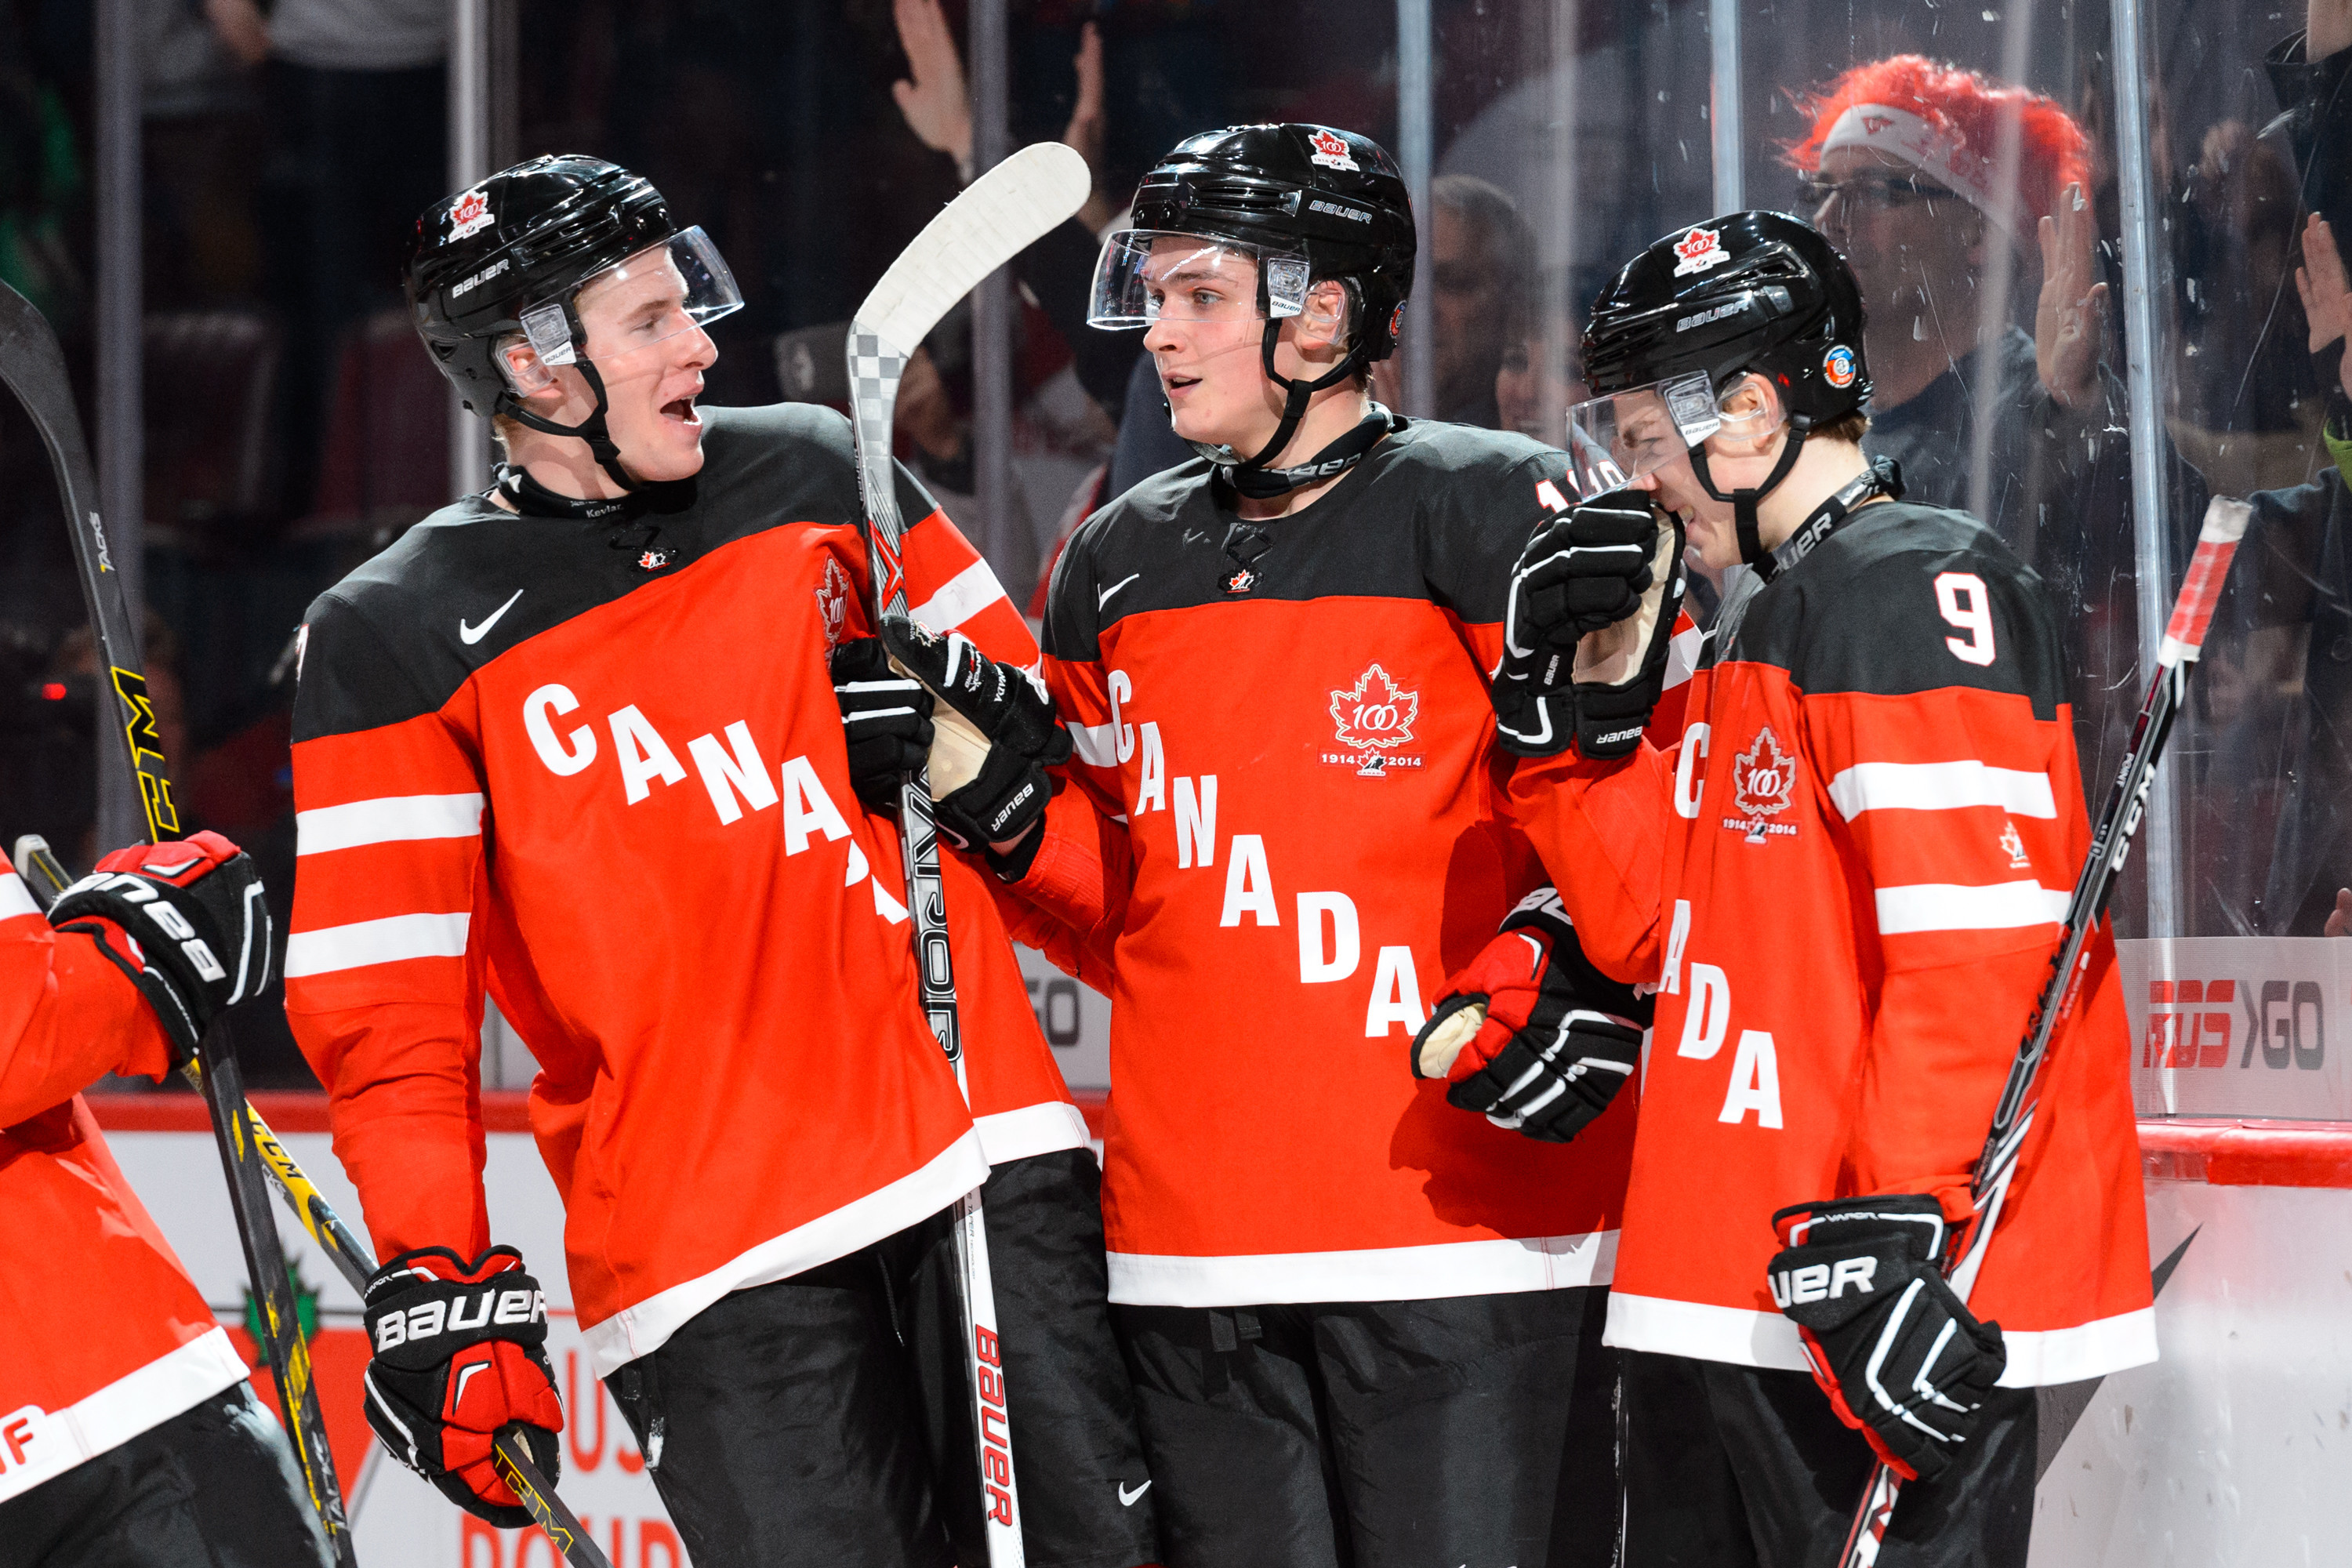 5-4 win over Russia brings Gold Medal to Canada, honors to Darnell